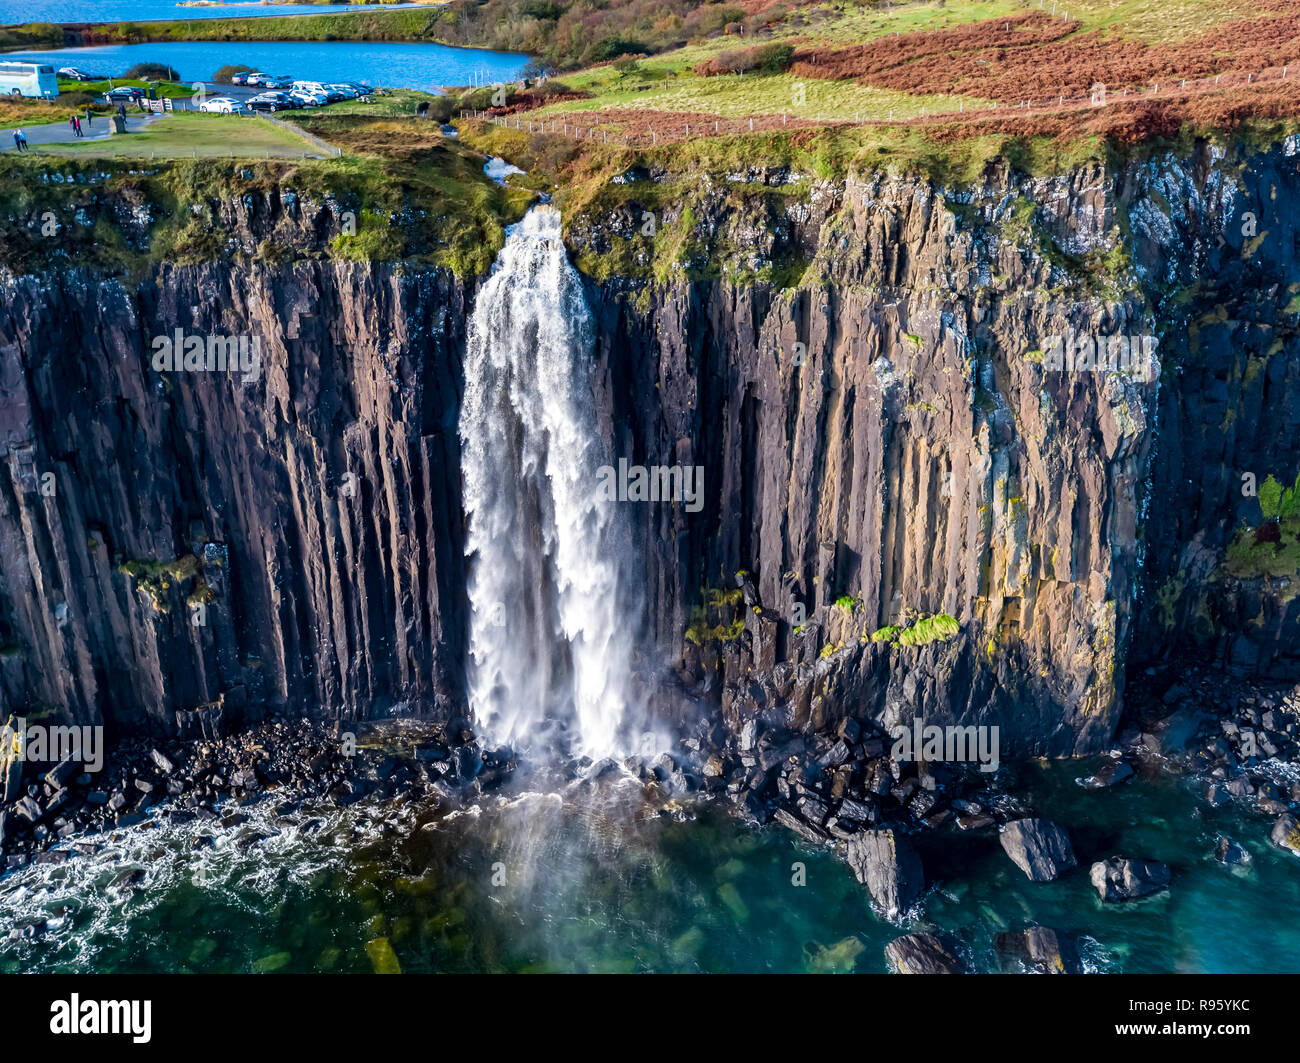 Aerial view of the dramatic coastline at the cliffs by Staffin with the famous Kilt Rock waterfall - Isle of Skye - Scotland. Stock Photo